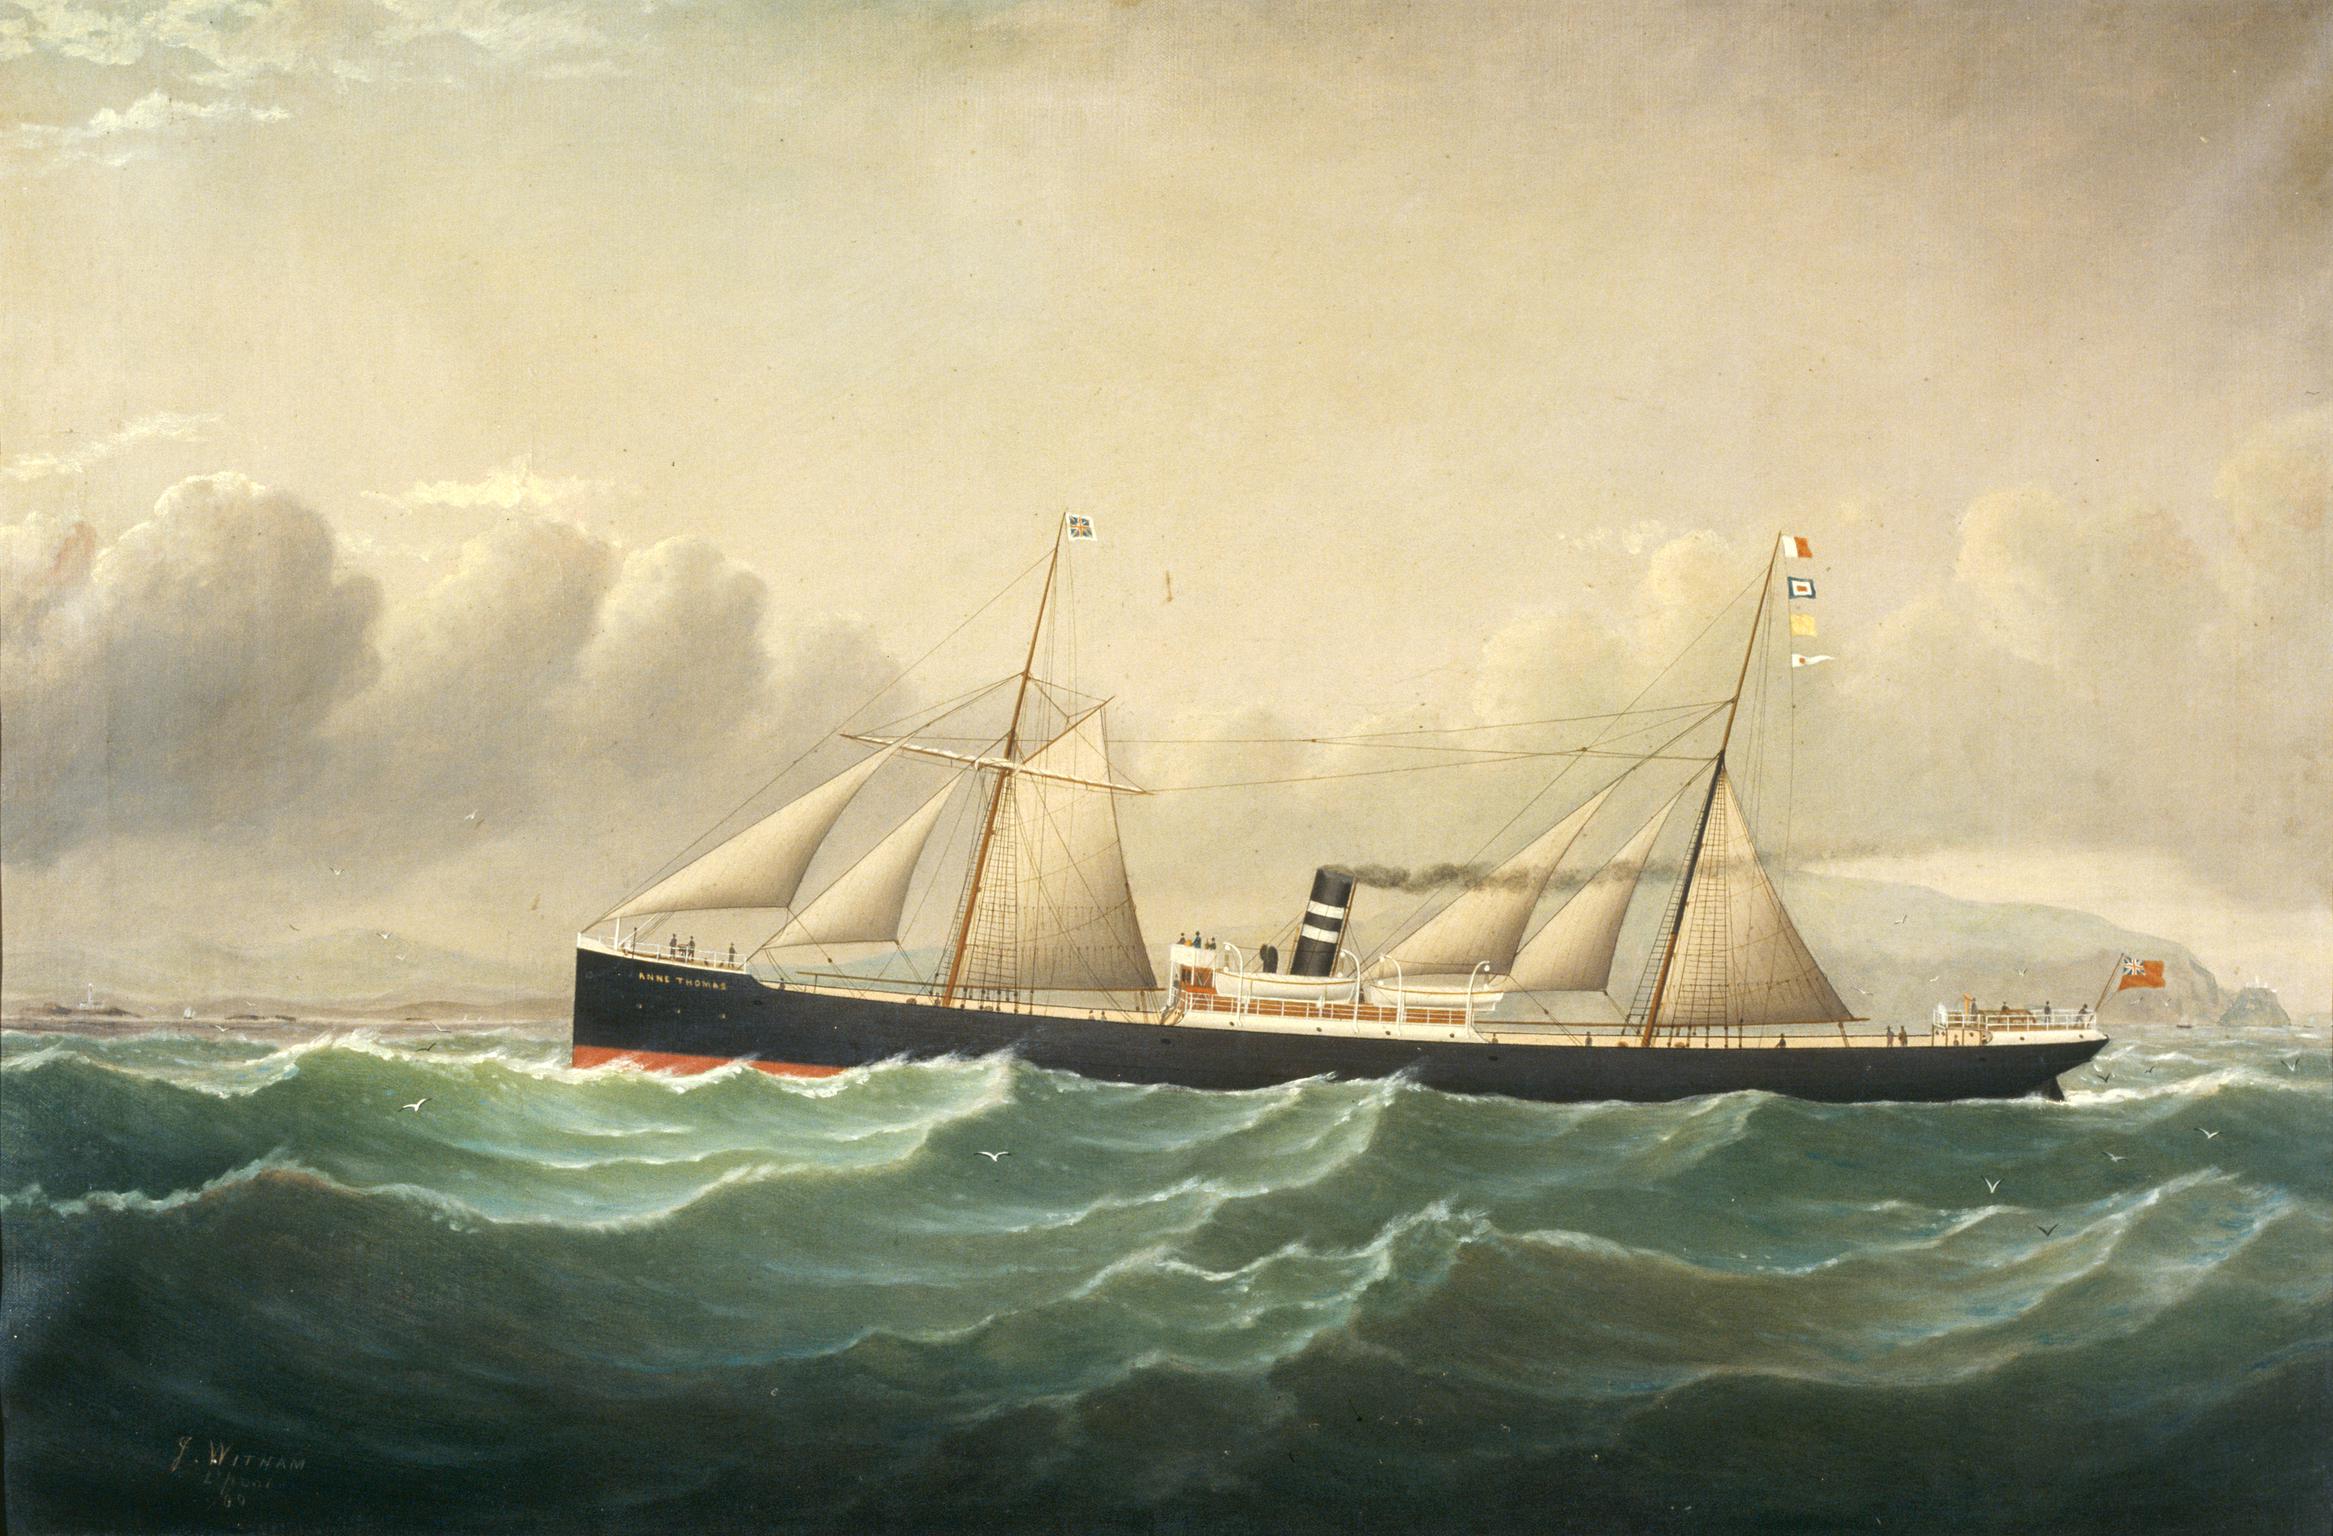 S.S. ANNE THOMAS of Cardiff (painting)